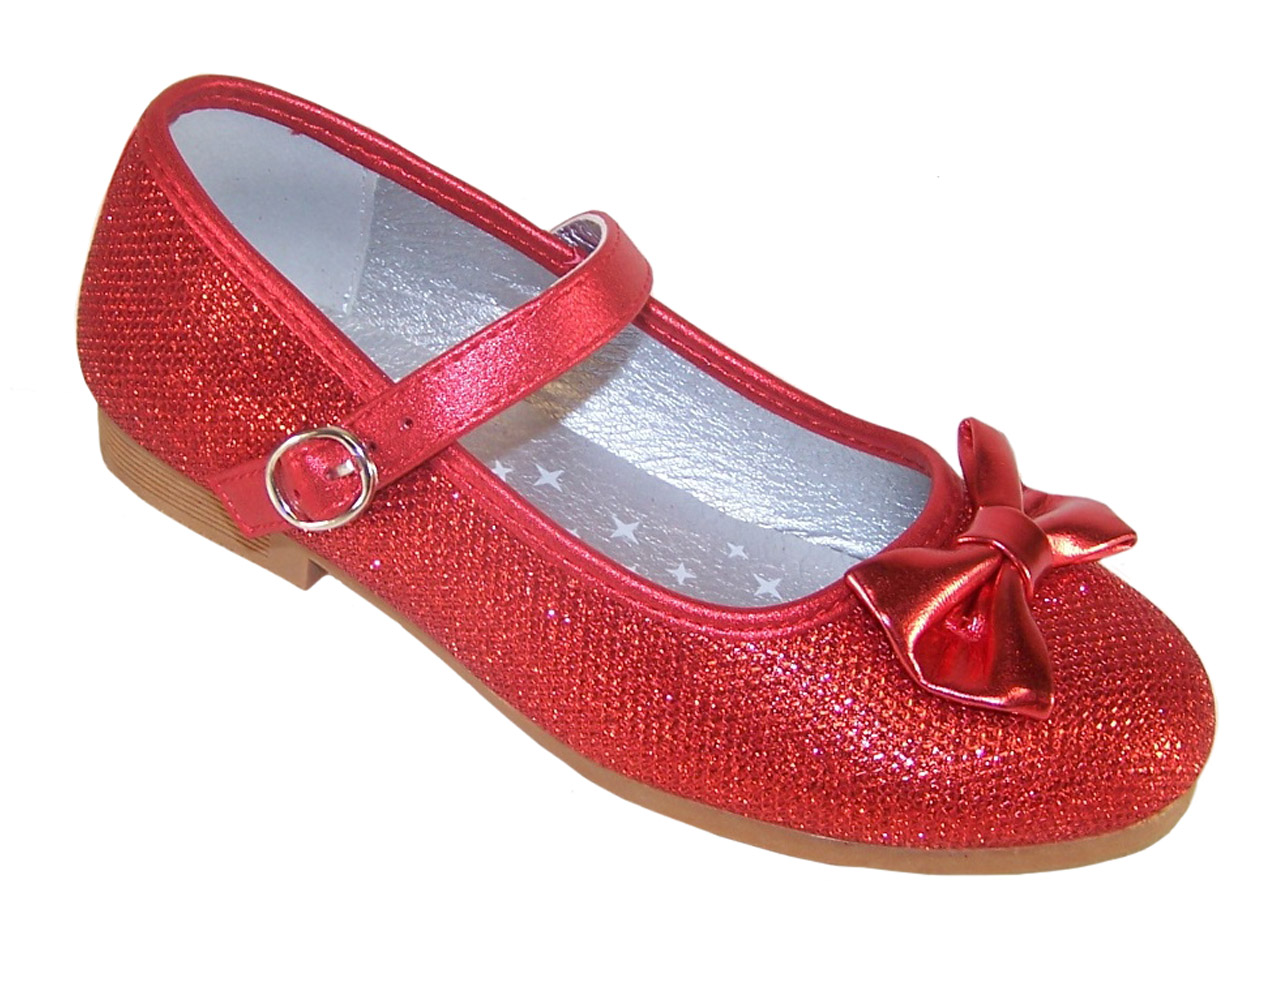 Girls red sparkly balllerina shoes with red heart shaped bag-5830